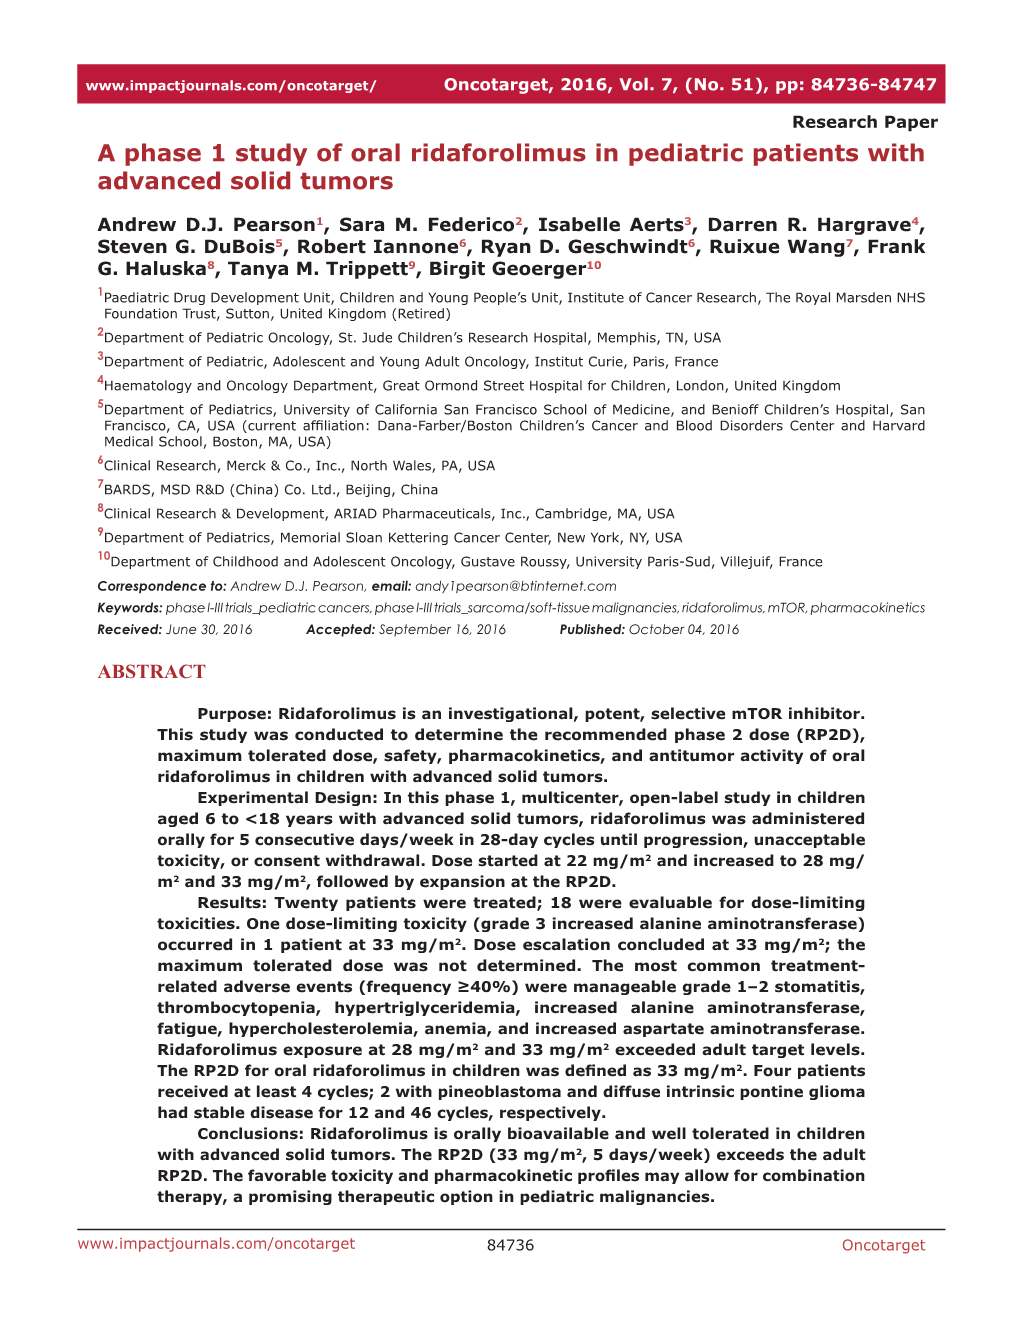 A Phase 1 Study of Oral Ridaforolimus in Pediatric Patients with Advanced Solid Tumors